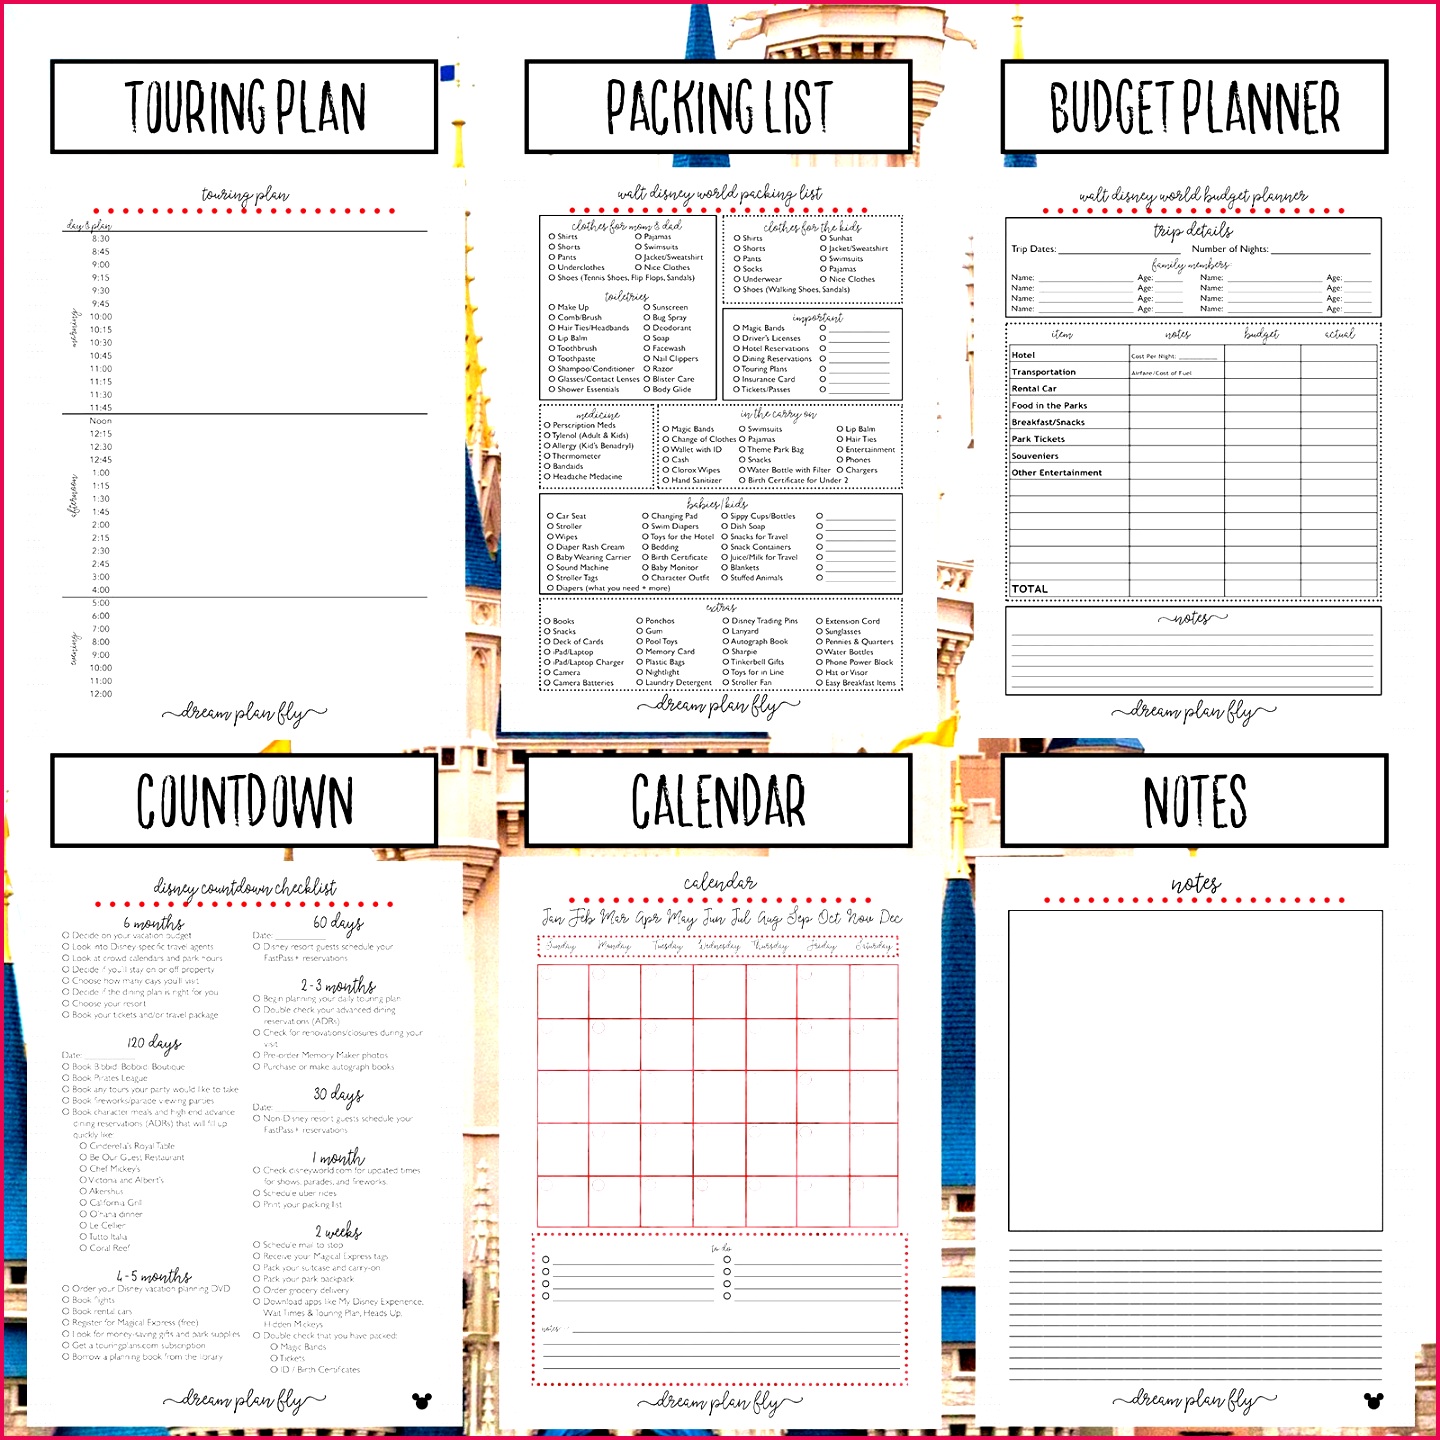 Employee Training Record Template Excel Beautiful Training Record Template In Excel Fresh Auto Maintenance Schedule